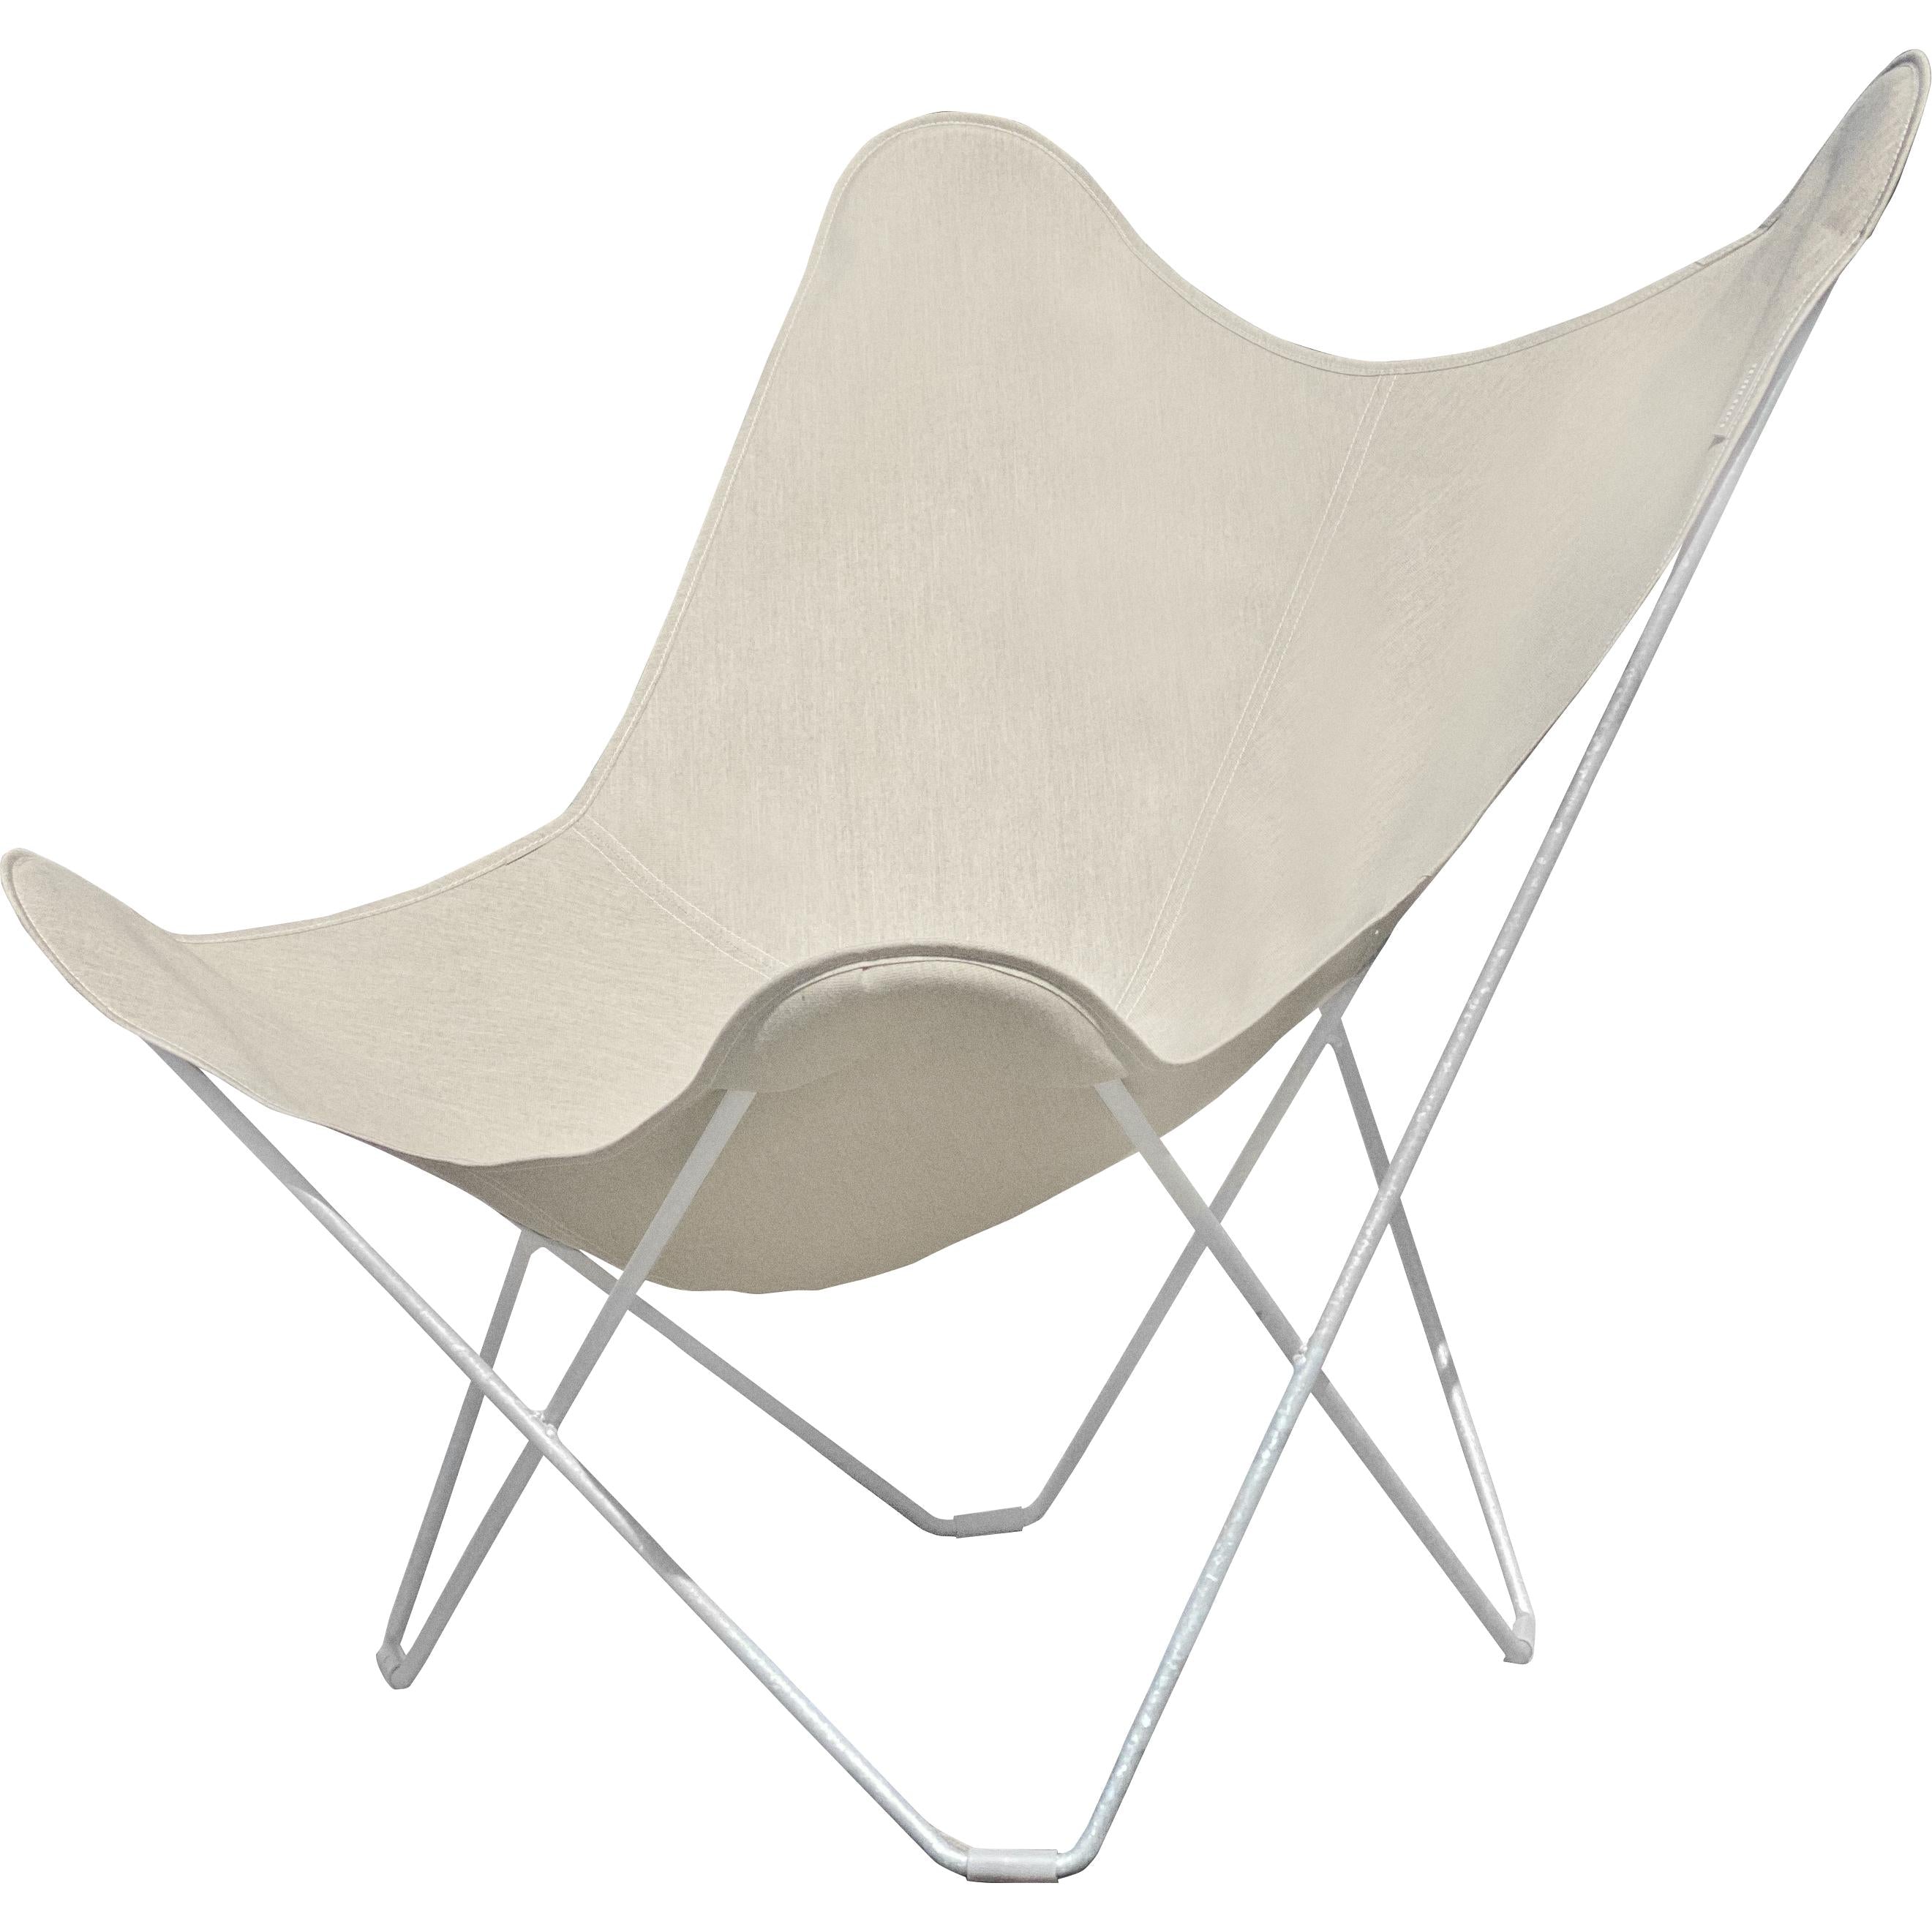 Cuero Sunshine Mariposa Butterfly Chair, Natural/Grey Outdoor Frame